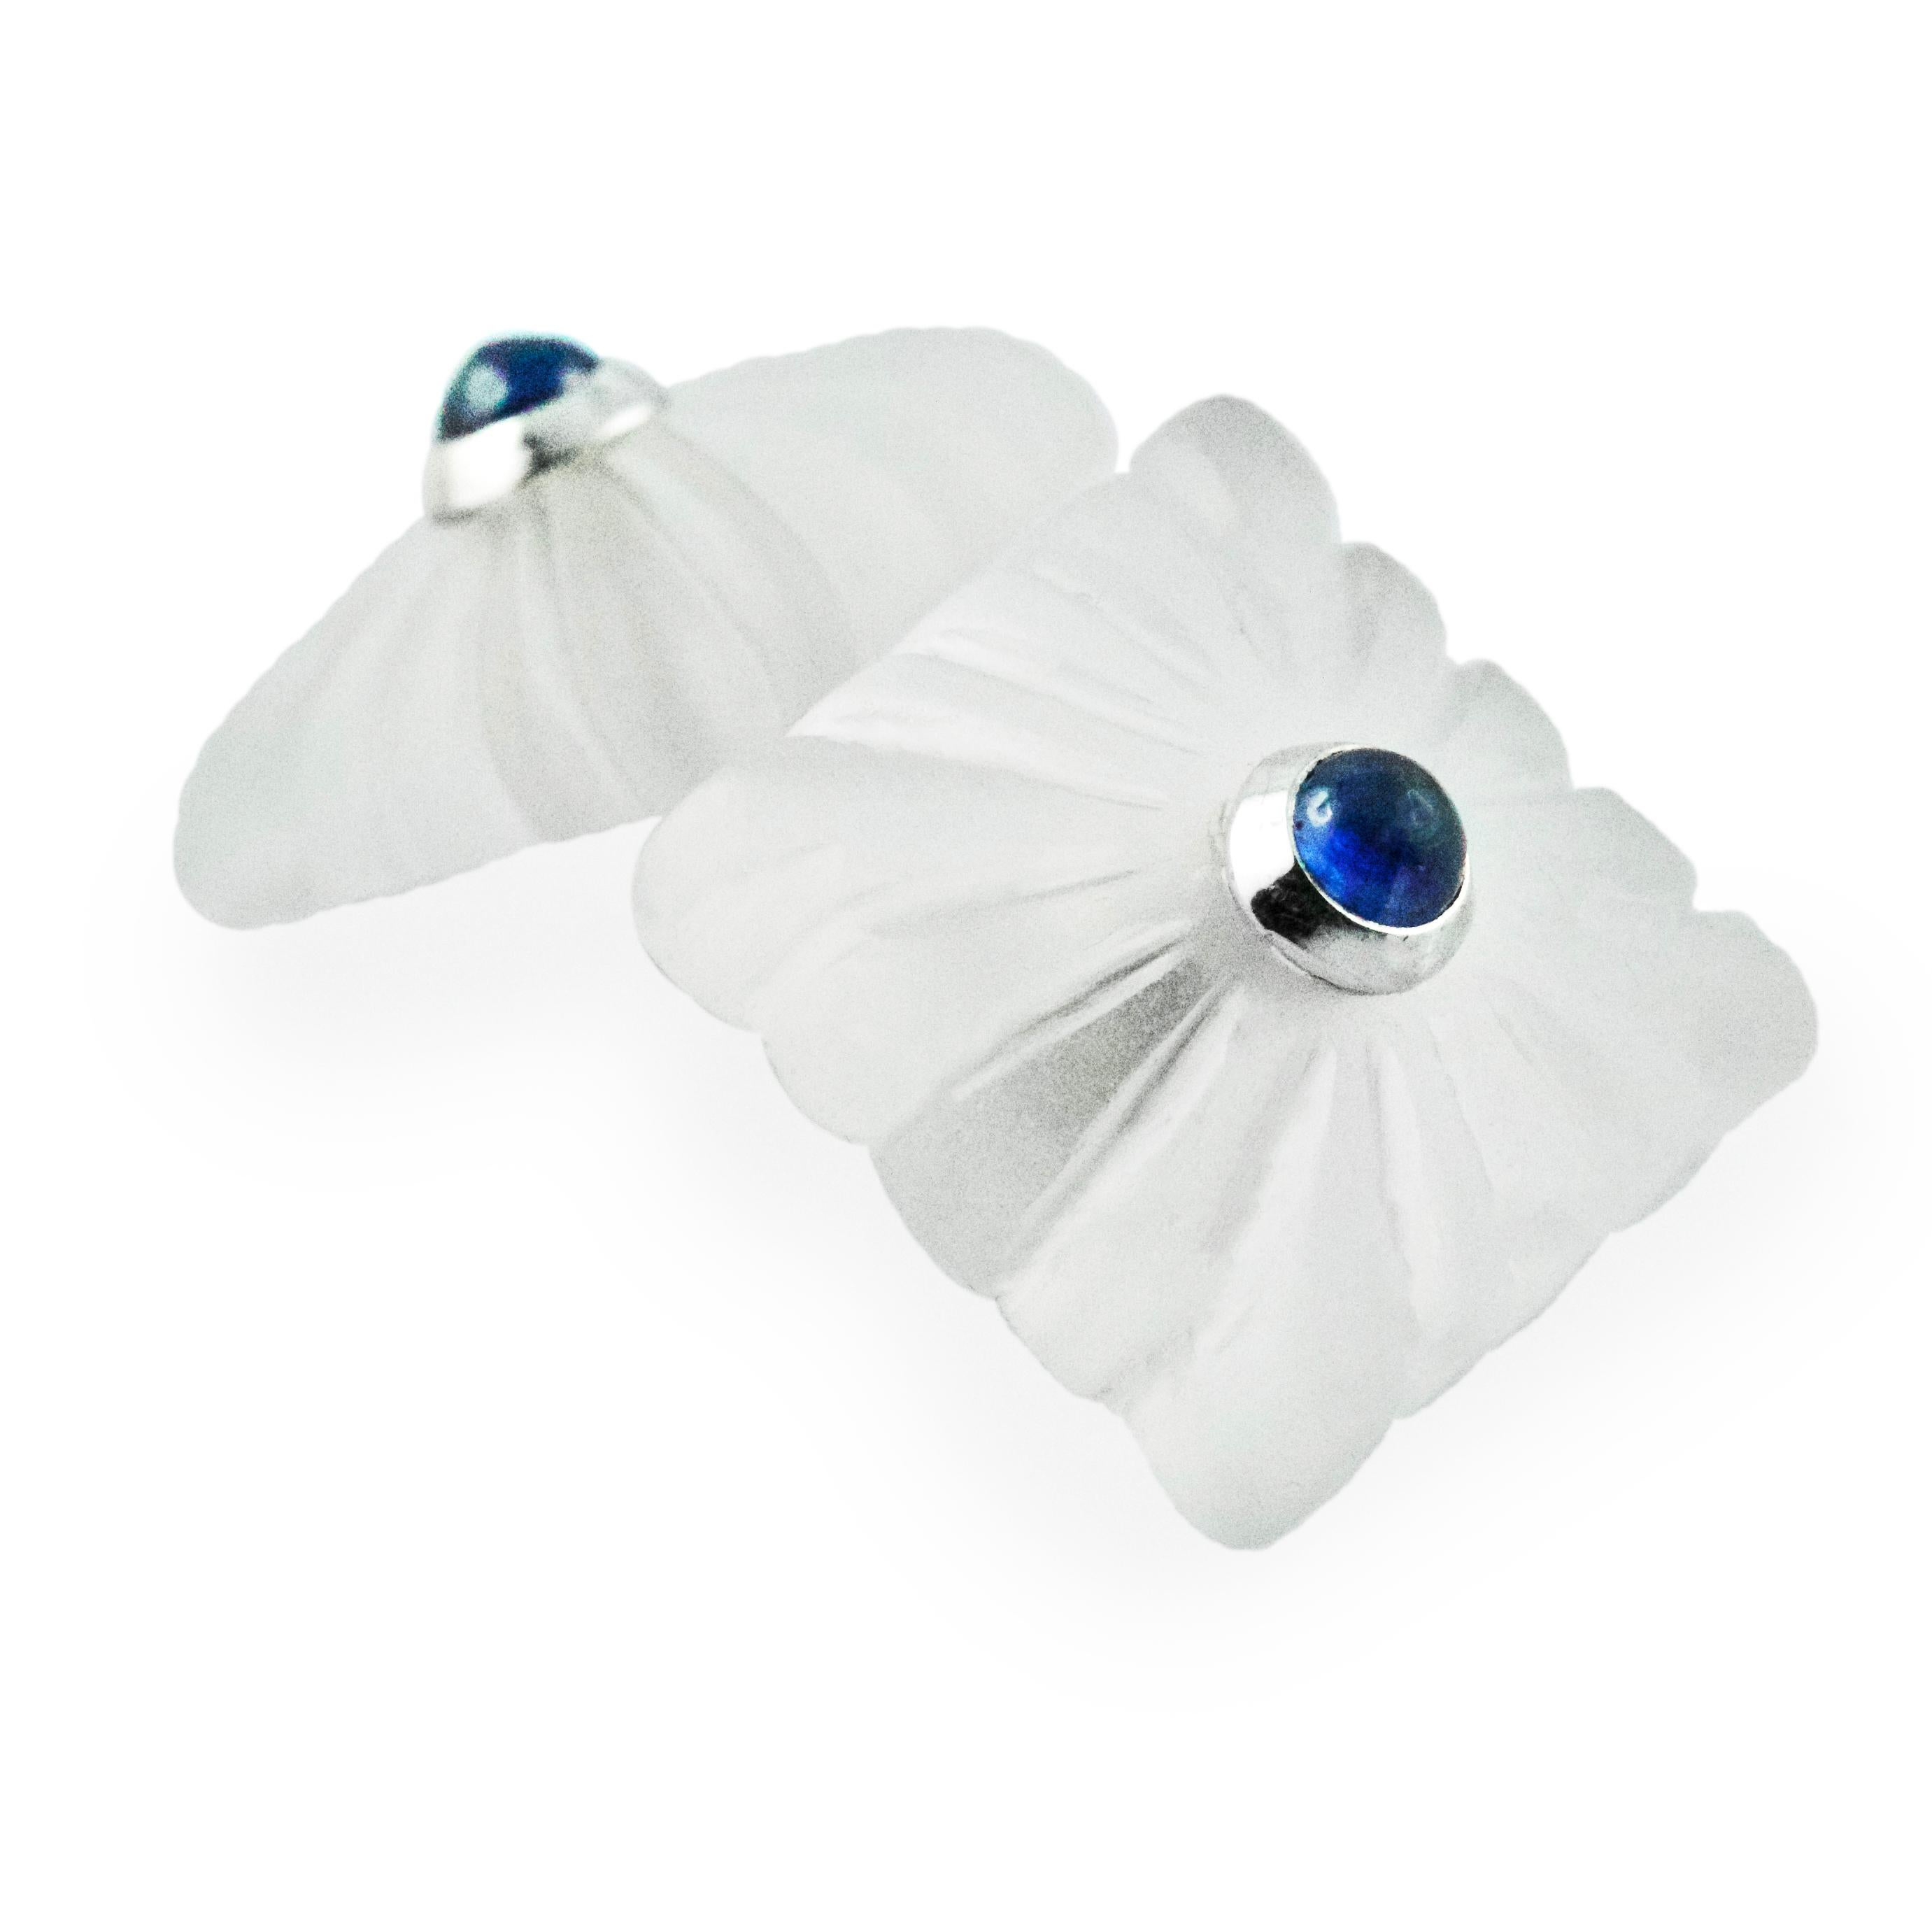 Cabochon 18 Karat White Gold Sapphires Carved Frosted Rock Crystal Cufflinks